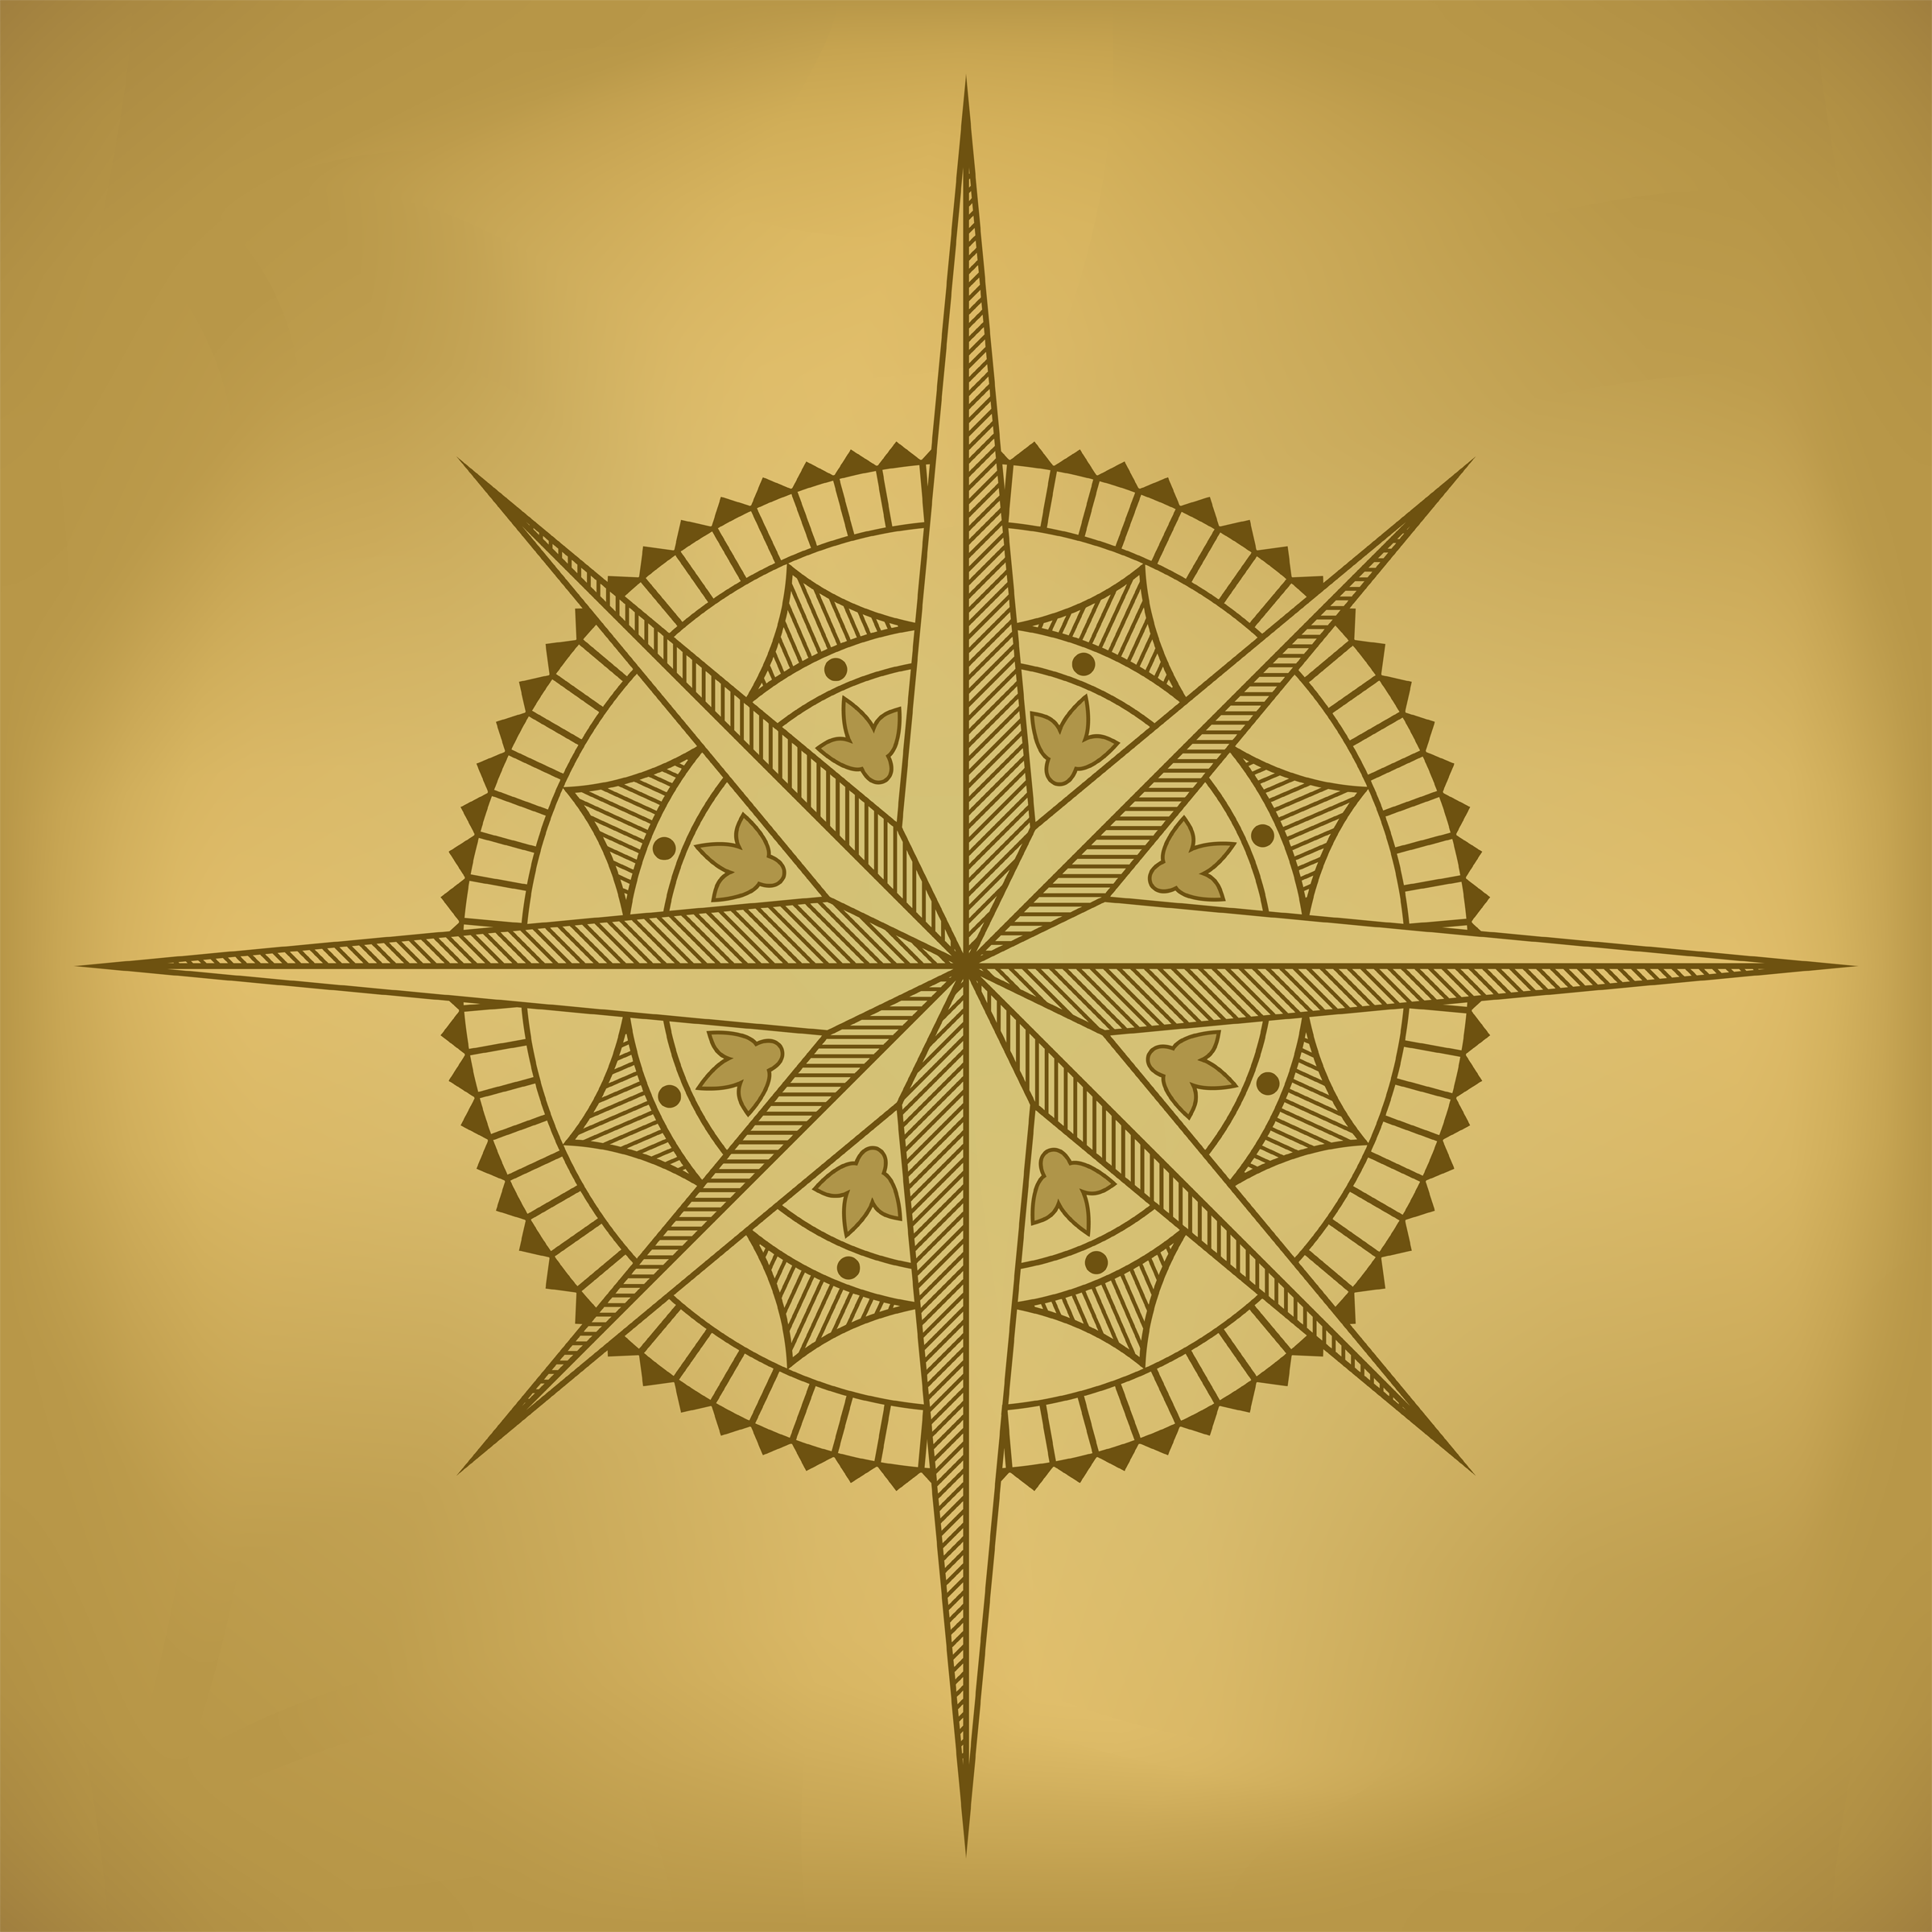 Compass rose distorted